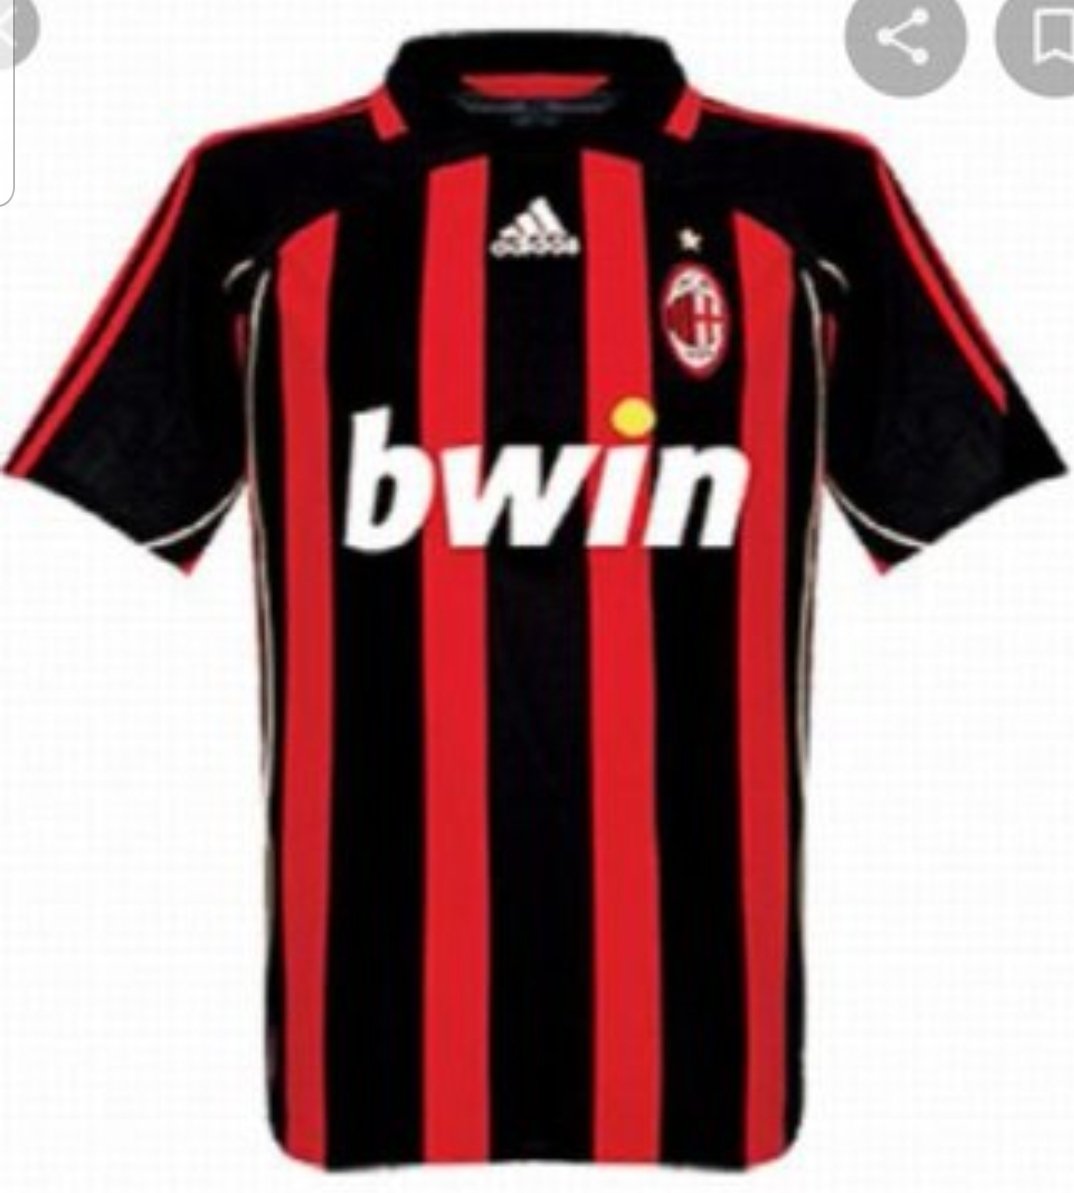 After the Germany kit I wanted to do something with a simpler, yet still iconic design and went for the kit that AC Milan lifter the champions league in